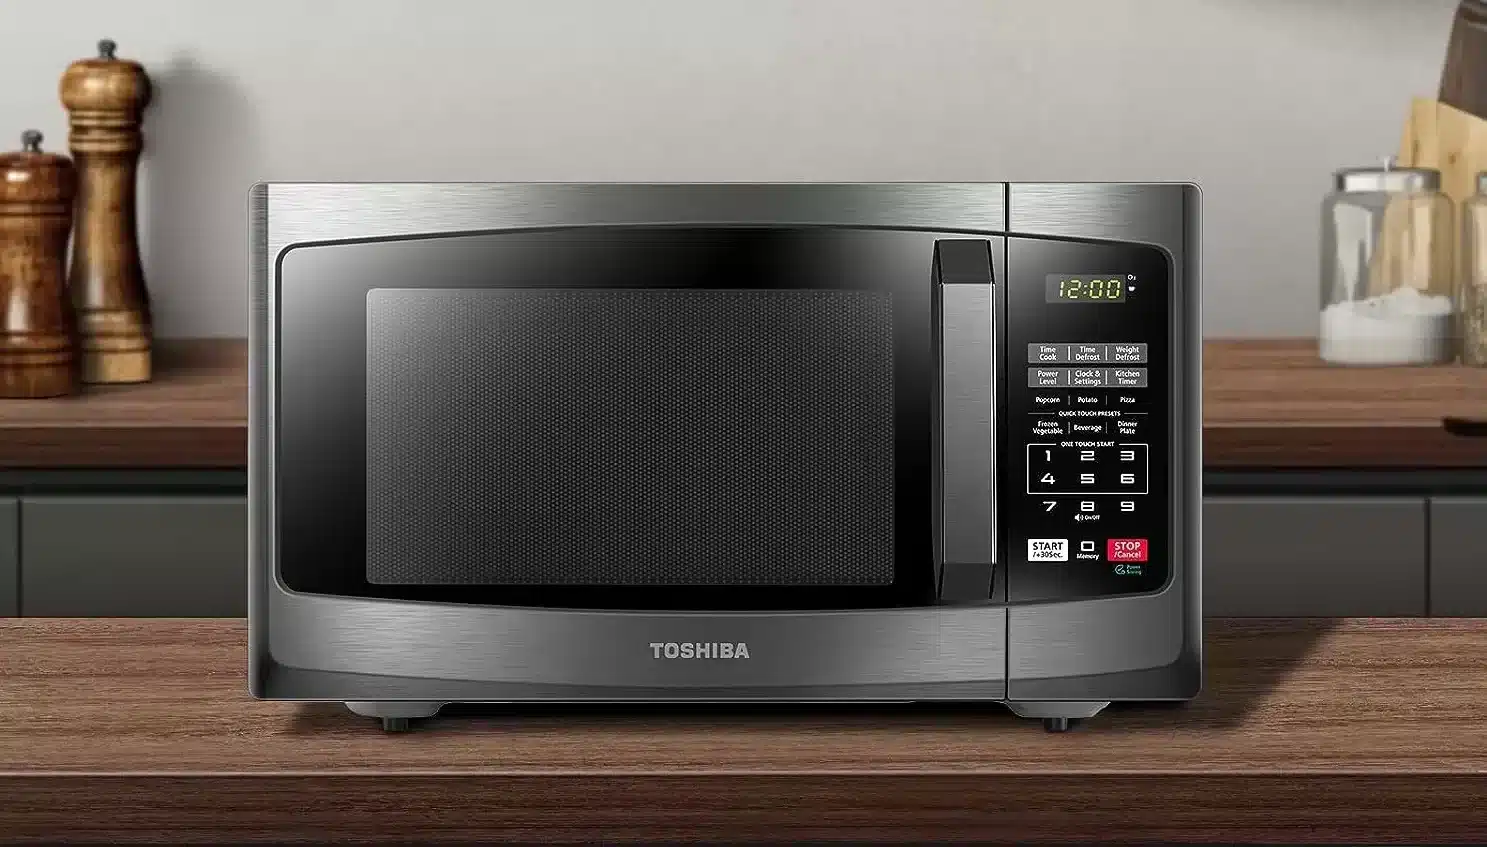 How To Use Air Fryer On Toshiba Microwave